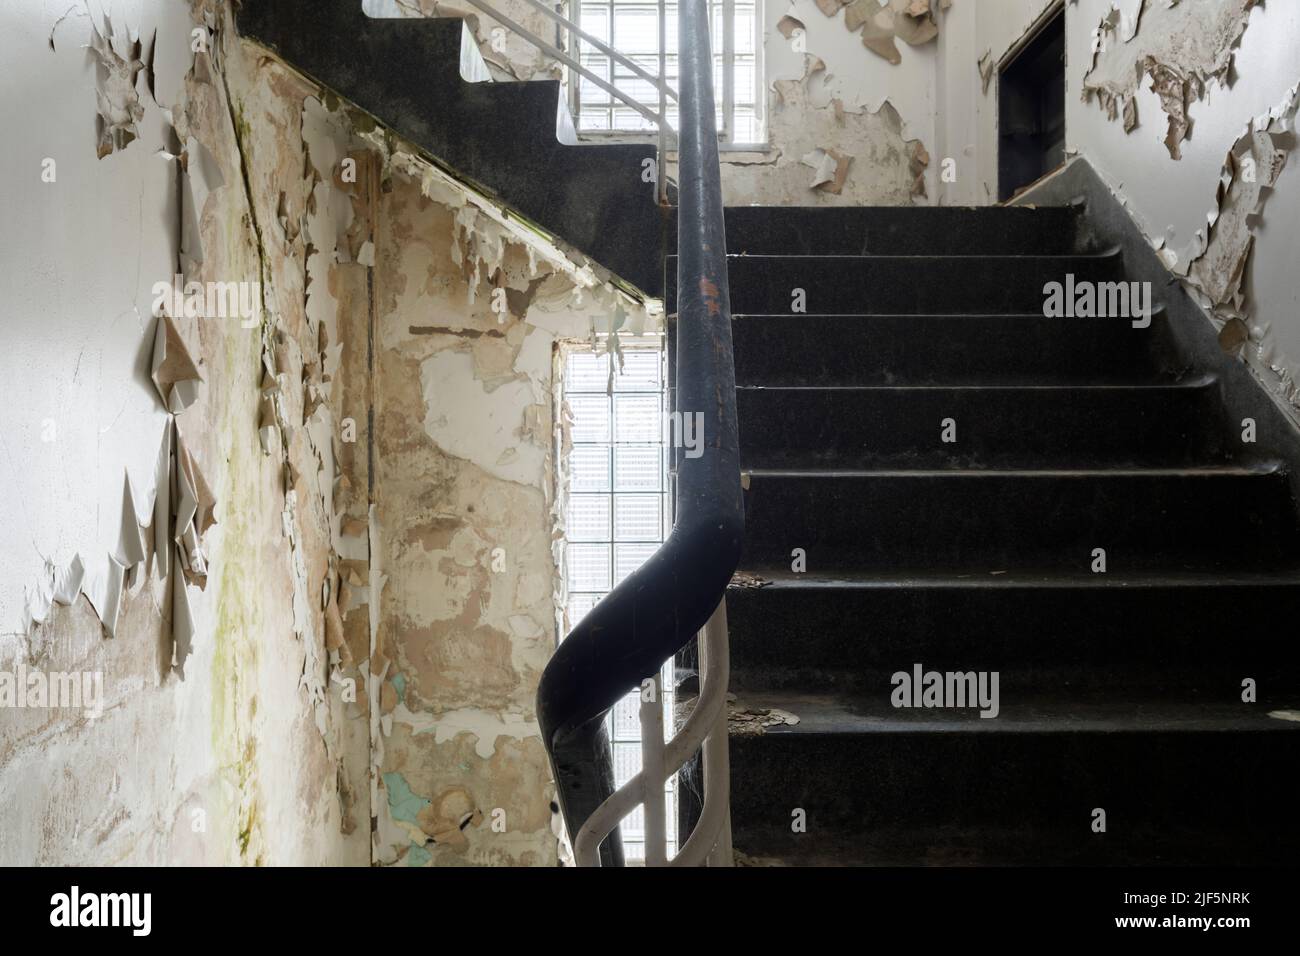 A staircase with peeling paint. Stock Photo